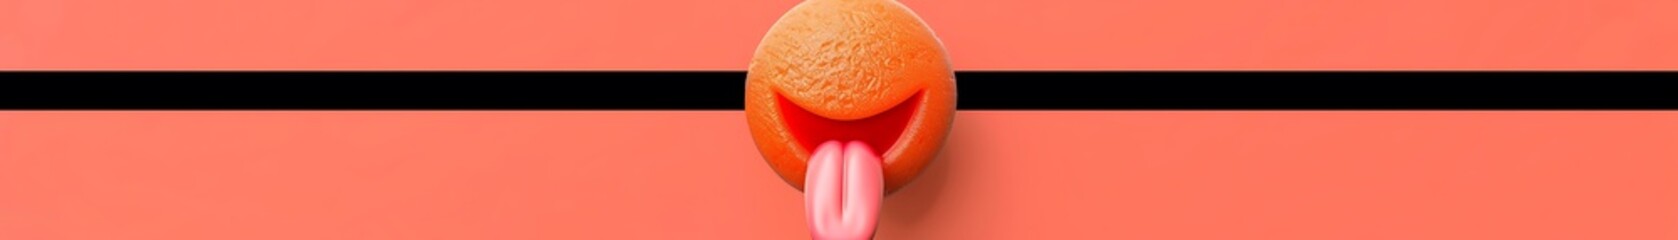 Wall Mural - tongue-out emoji on a coral background with space for text The emoji is orange with a playful tongue sticking out